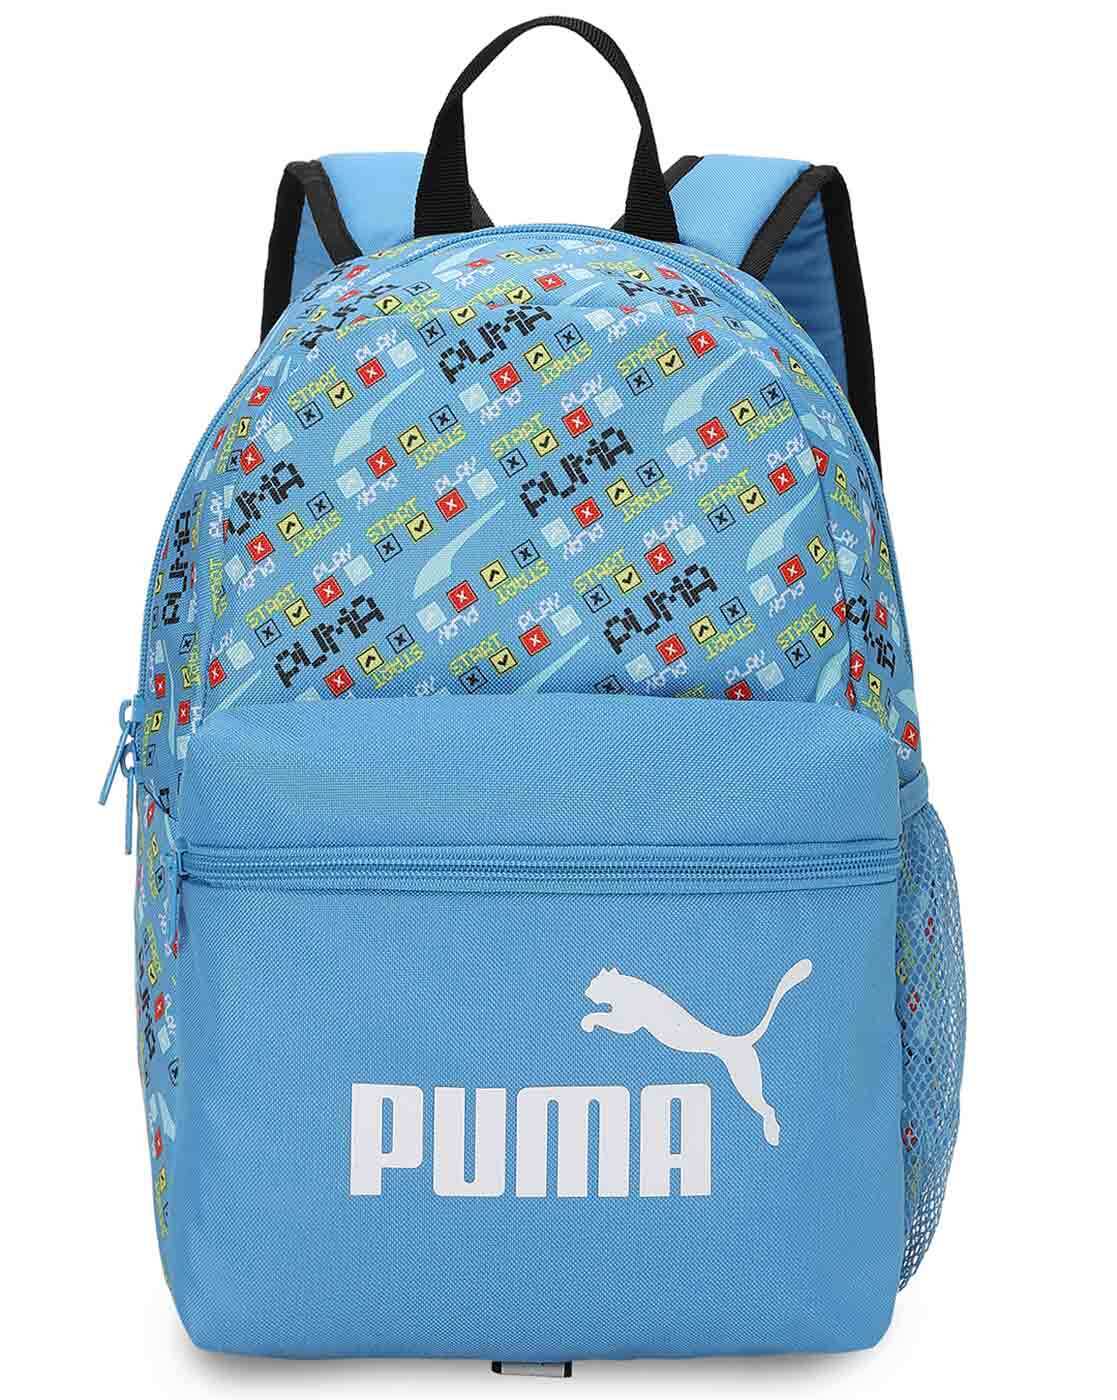 Branded Fashion Online Market Philippines - Puma Backpack (Blue) ₱1,100  Product Description 100% Authentic Best for lifestyle Monochrome contrast  logo backpack One side mesh pocket One front zip pocket You can buy